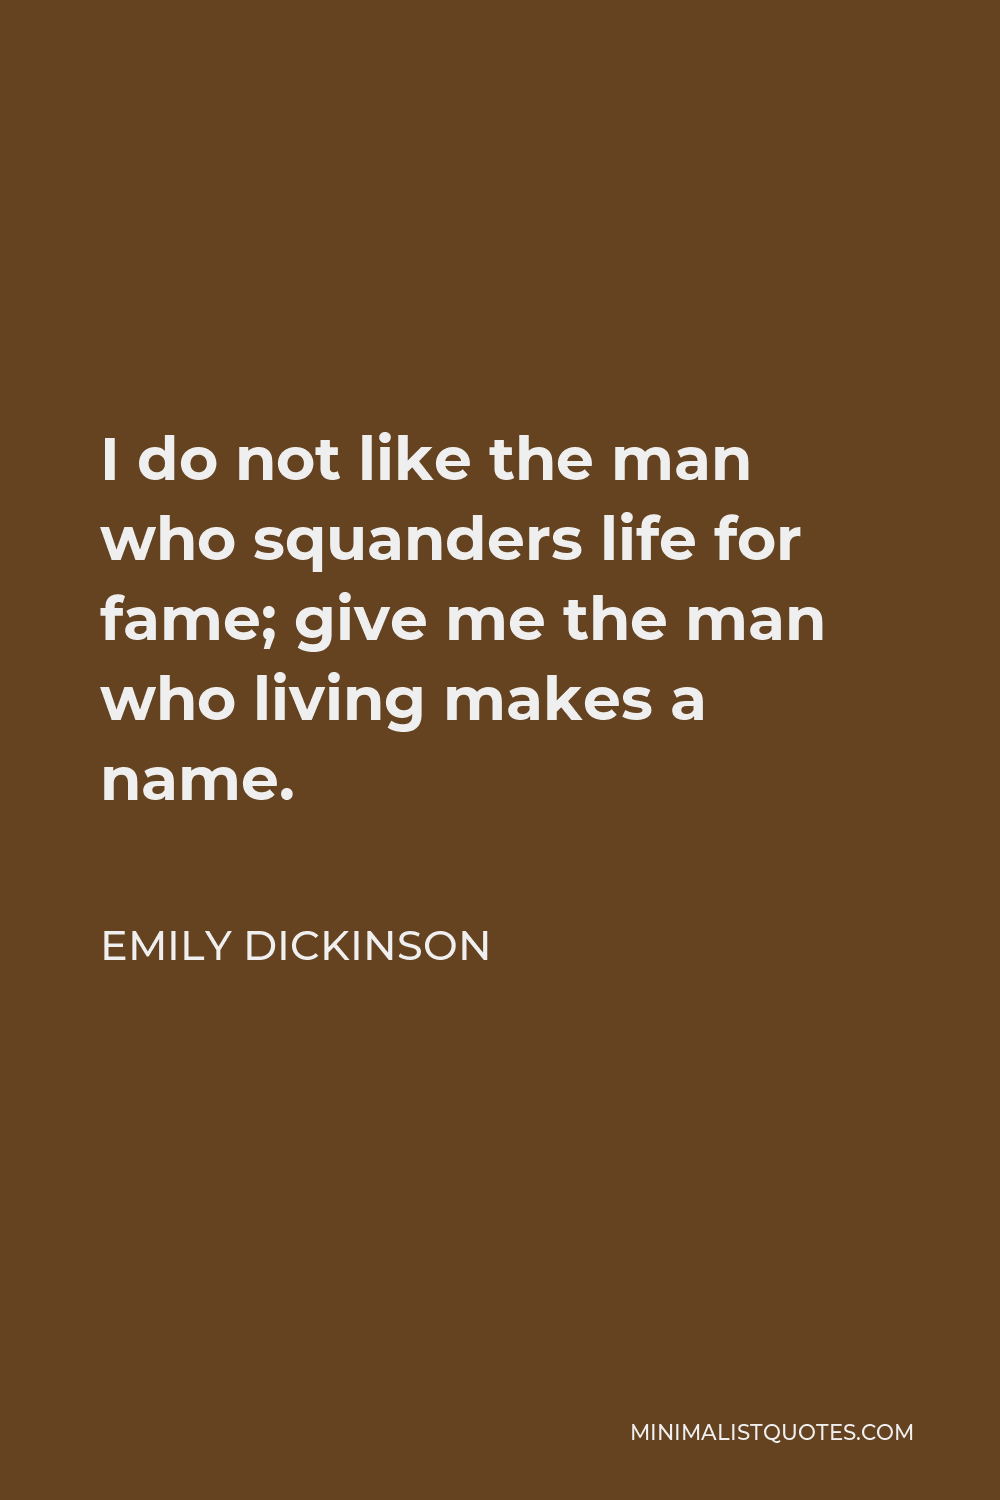 Emily Dickinson Quote - I do not like the man who squanders life for fame; give me the man who living makes a name.